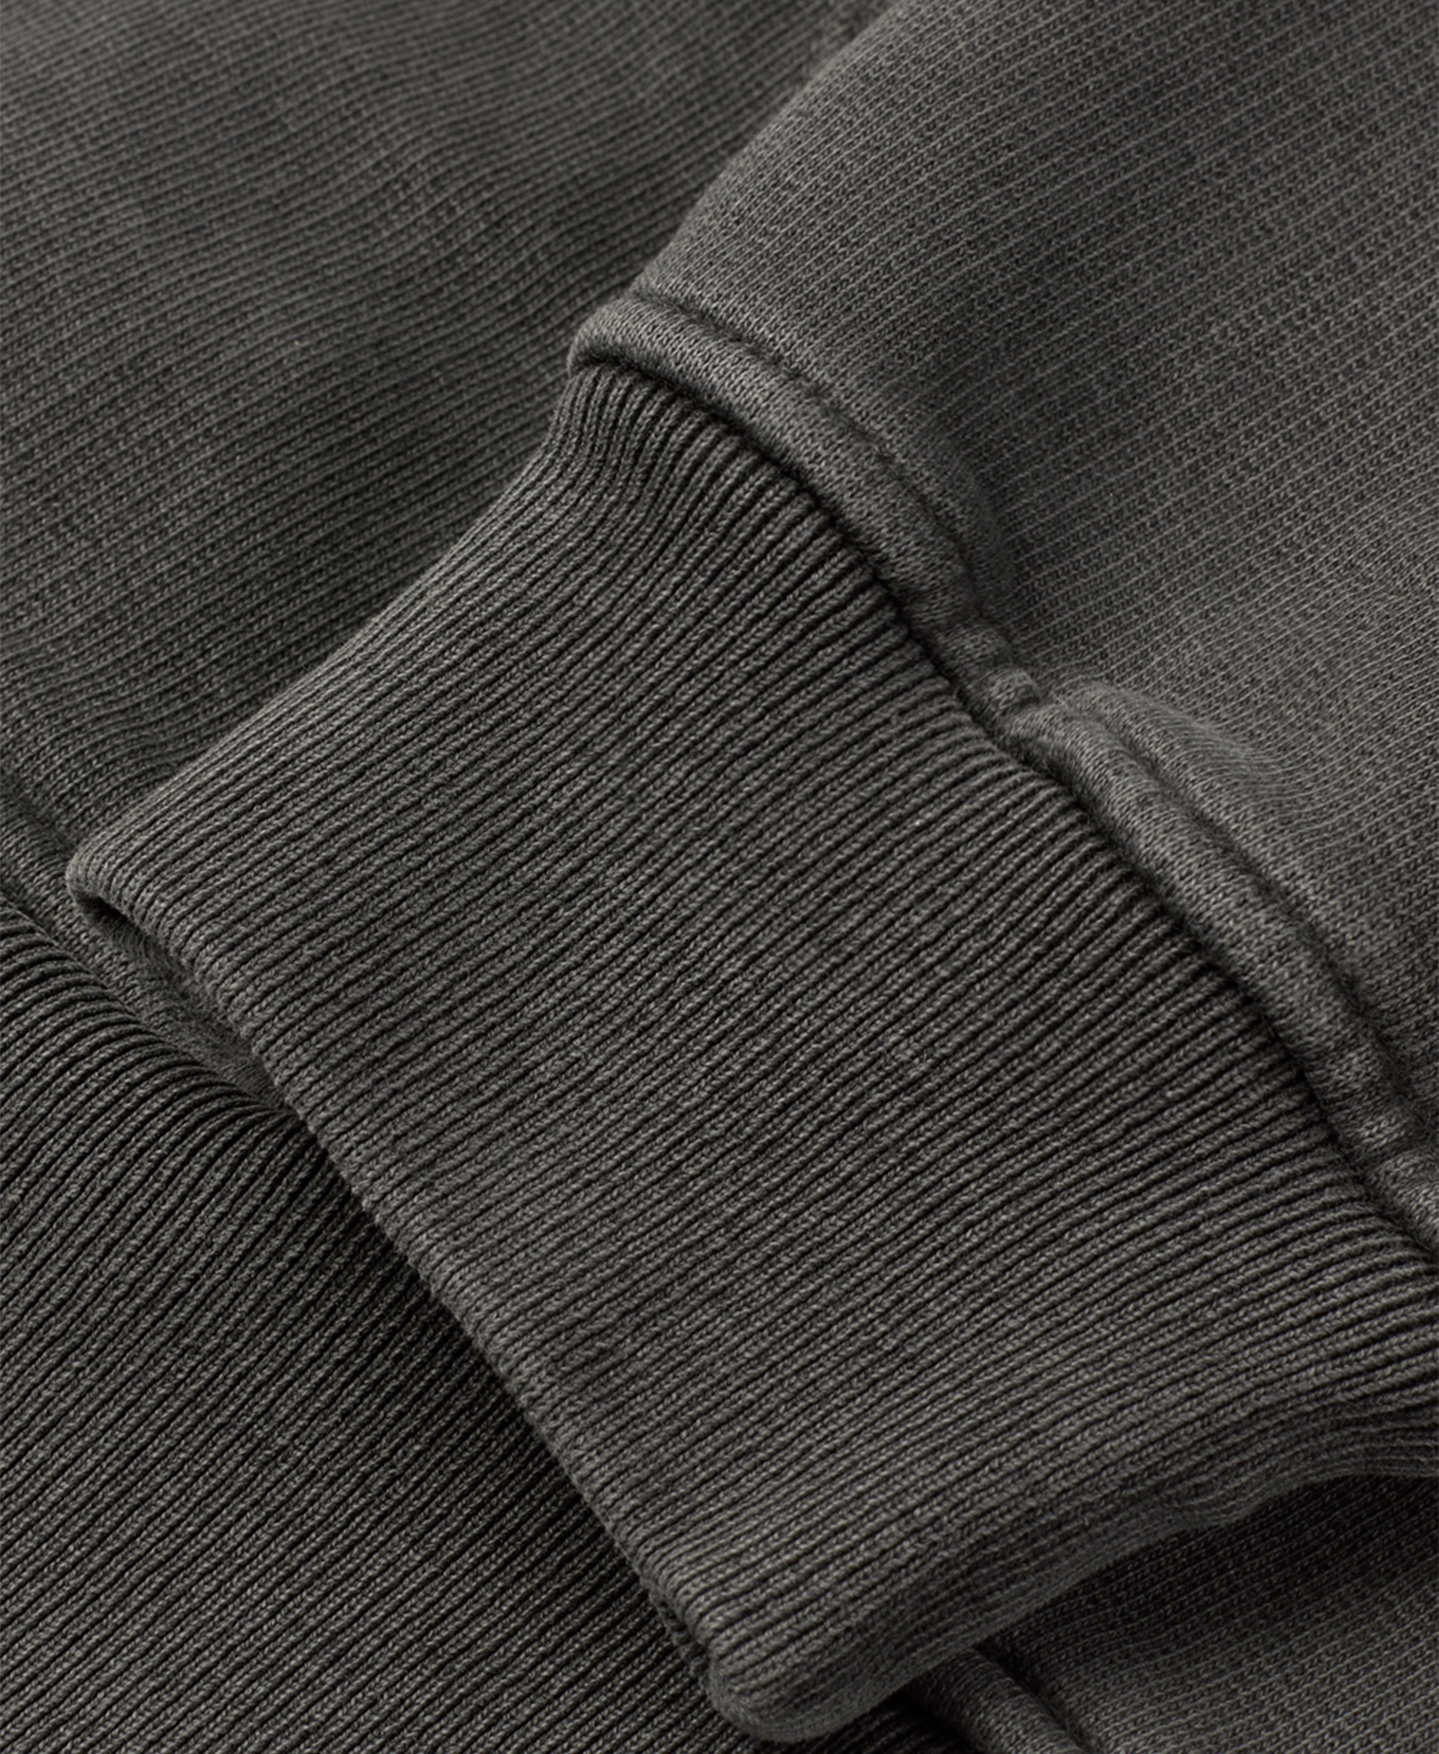 600 GSM 'Anthracite' Hoodie